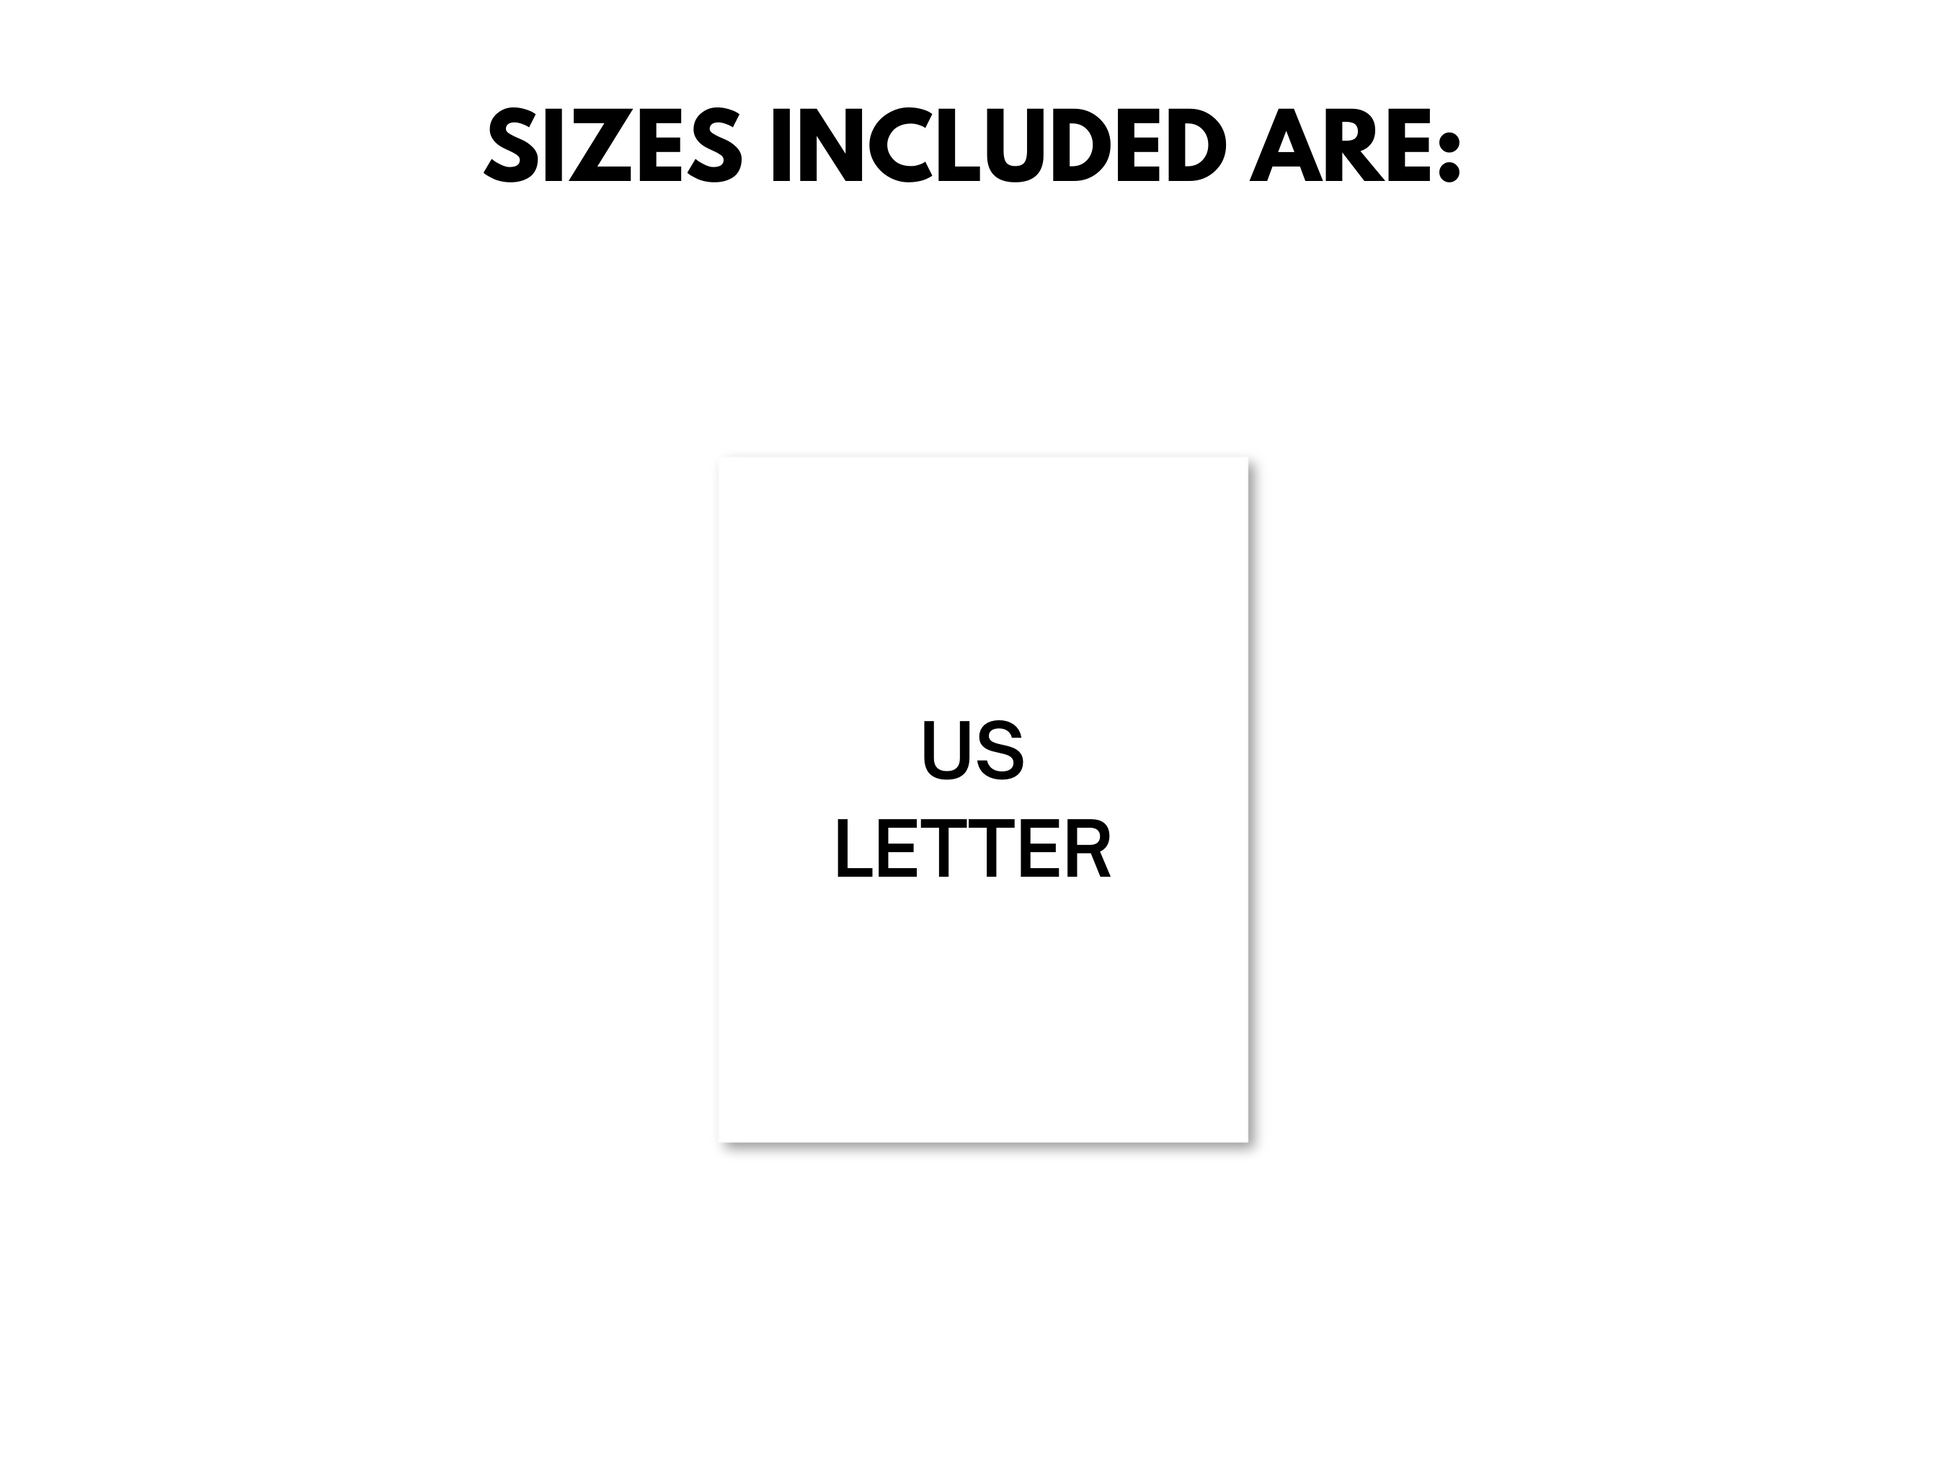 Statement of the size included, US letter